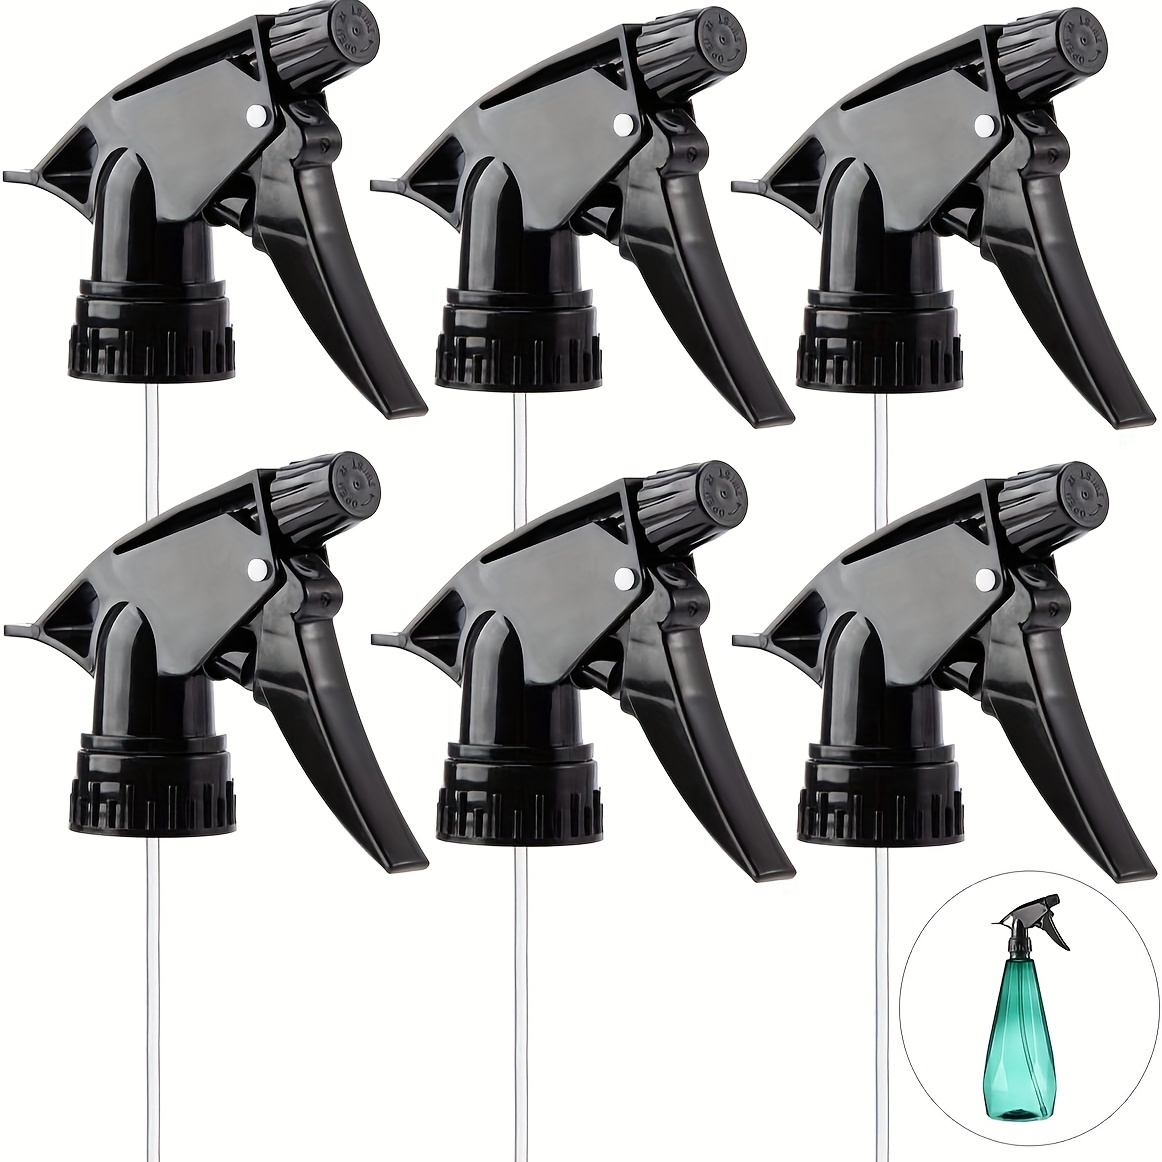 

6pcs, Spray Bottle Replacement Nozzle- Reusable Heavy Duty Mist Spray & Stream Sprayer Replacement Tops Fit Standard 28/400 Neck Bottles For Home Office Cleaning Household Supplies(black)